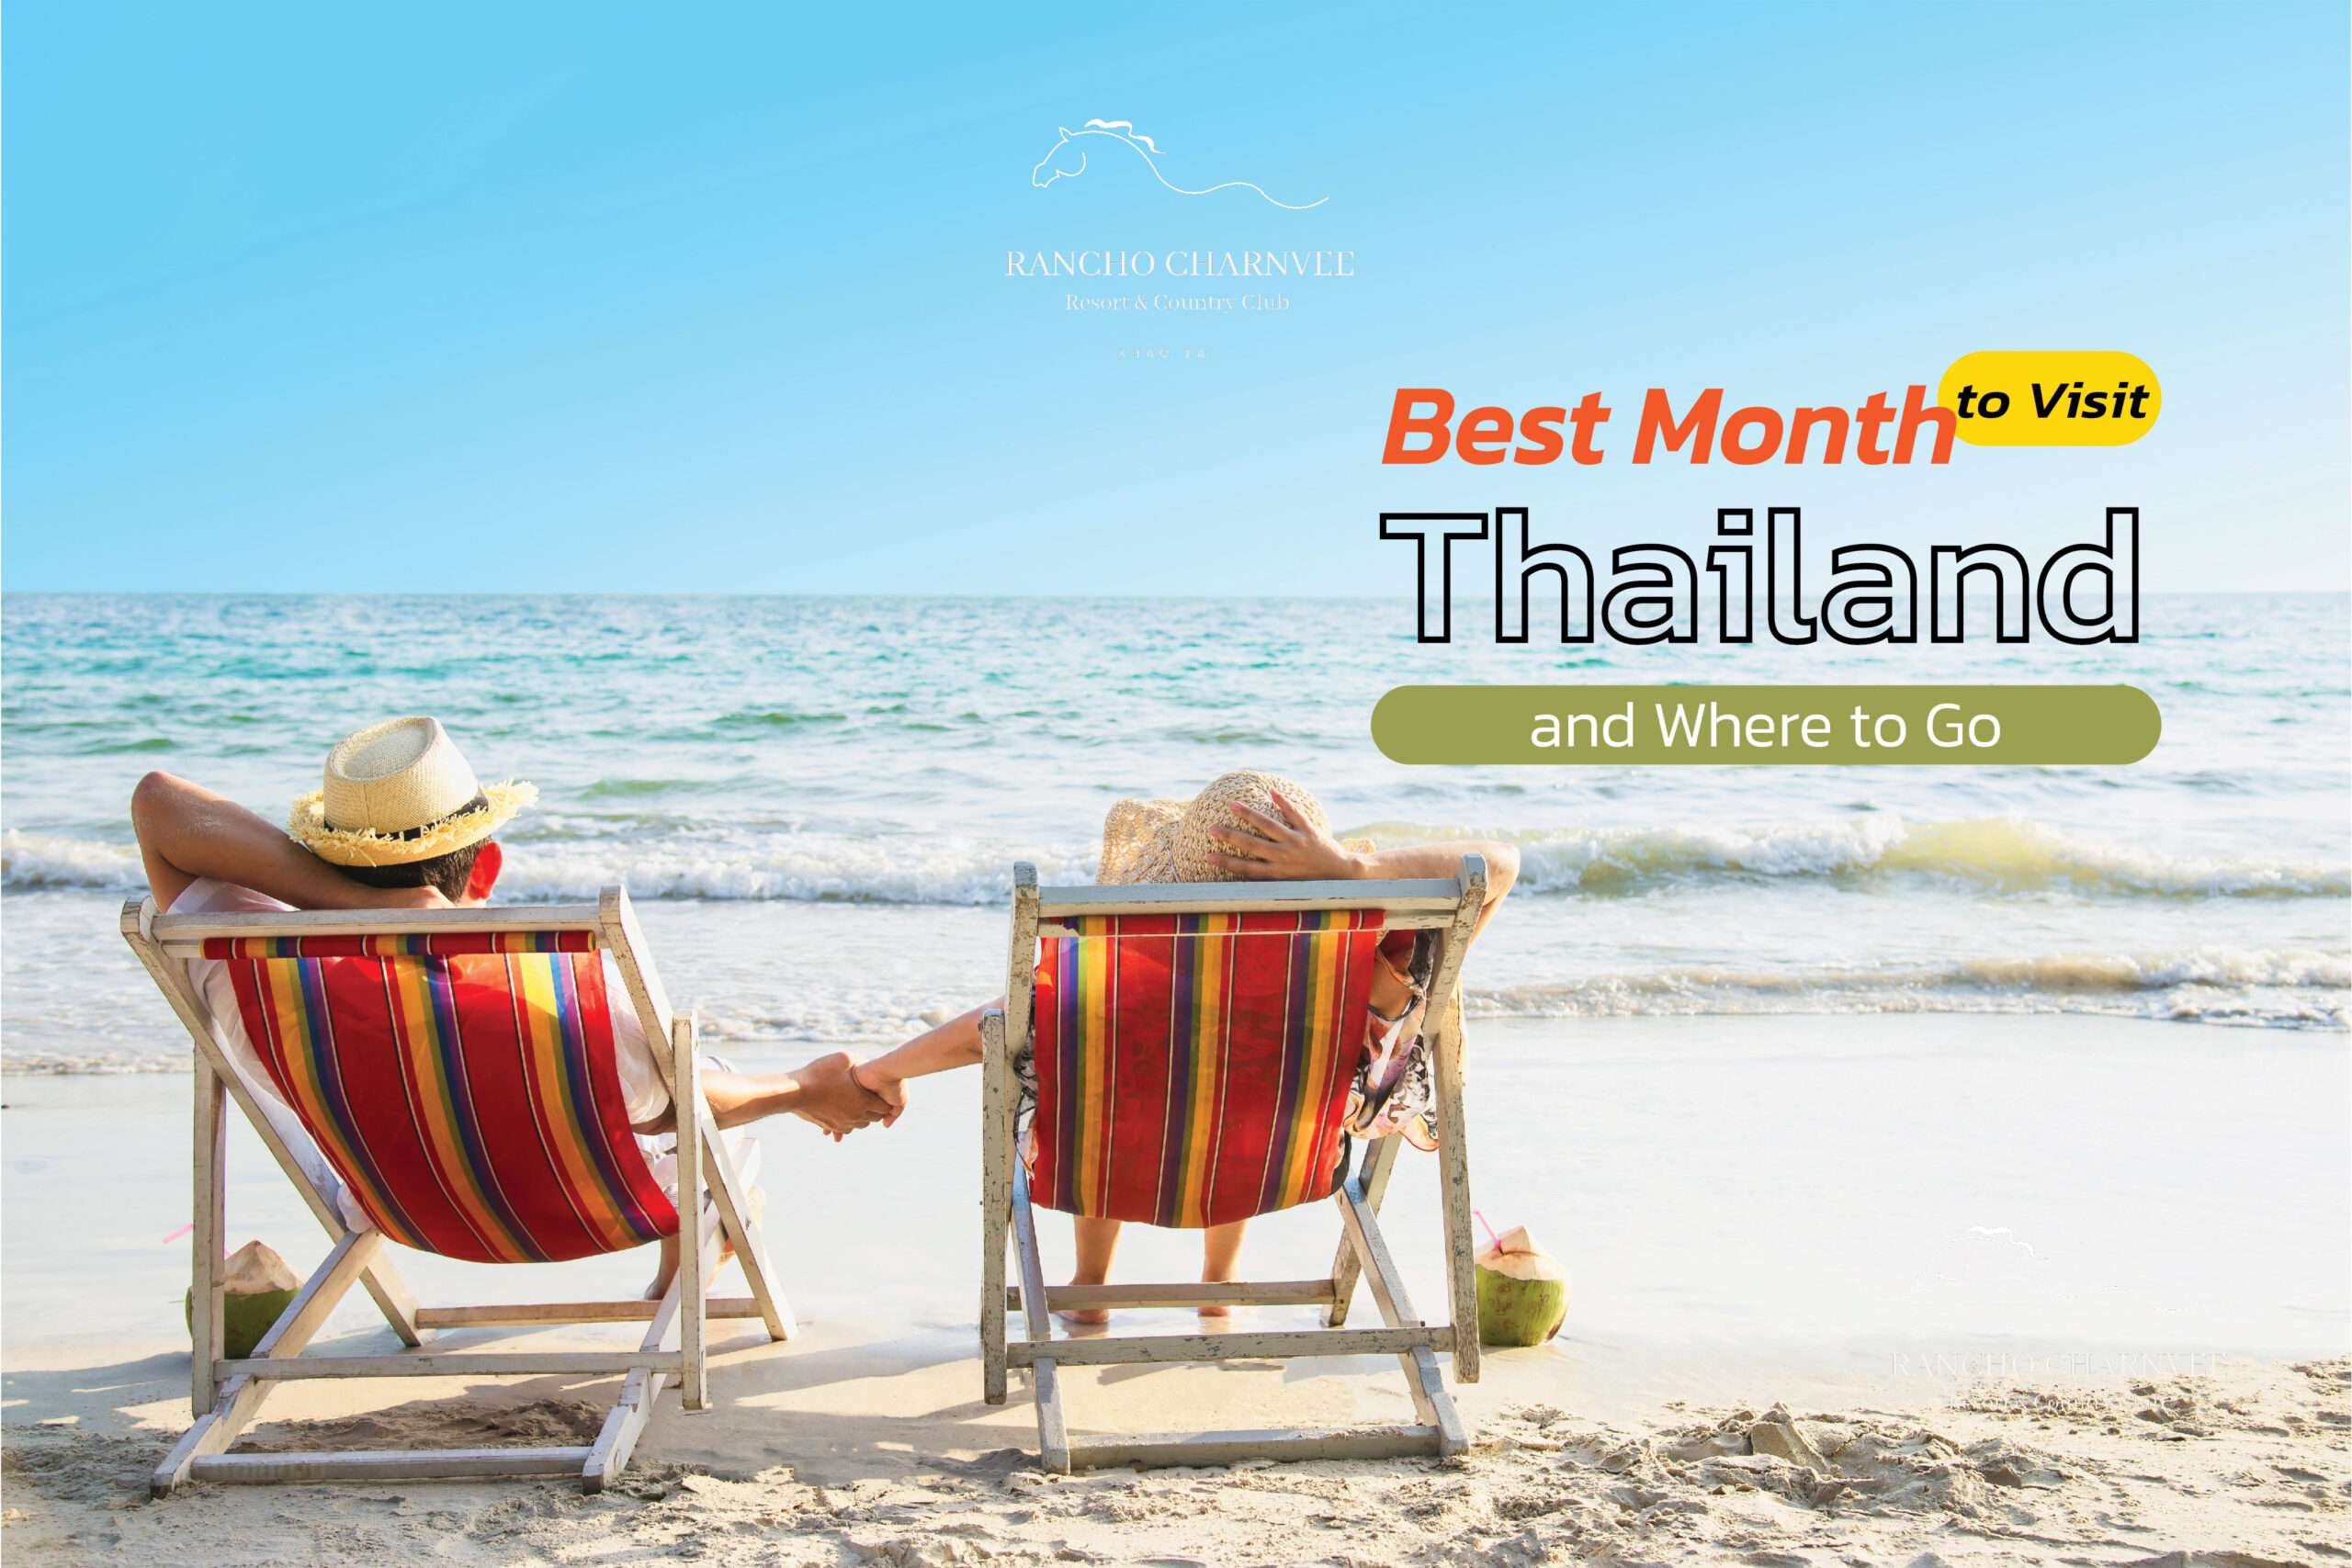 Best Month to Visit Thailand and Where to Go